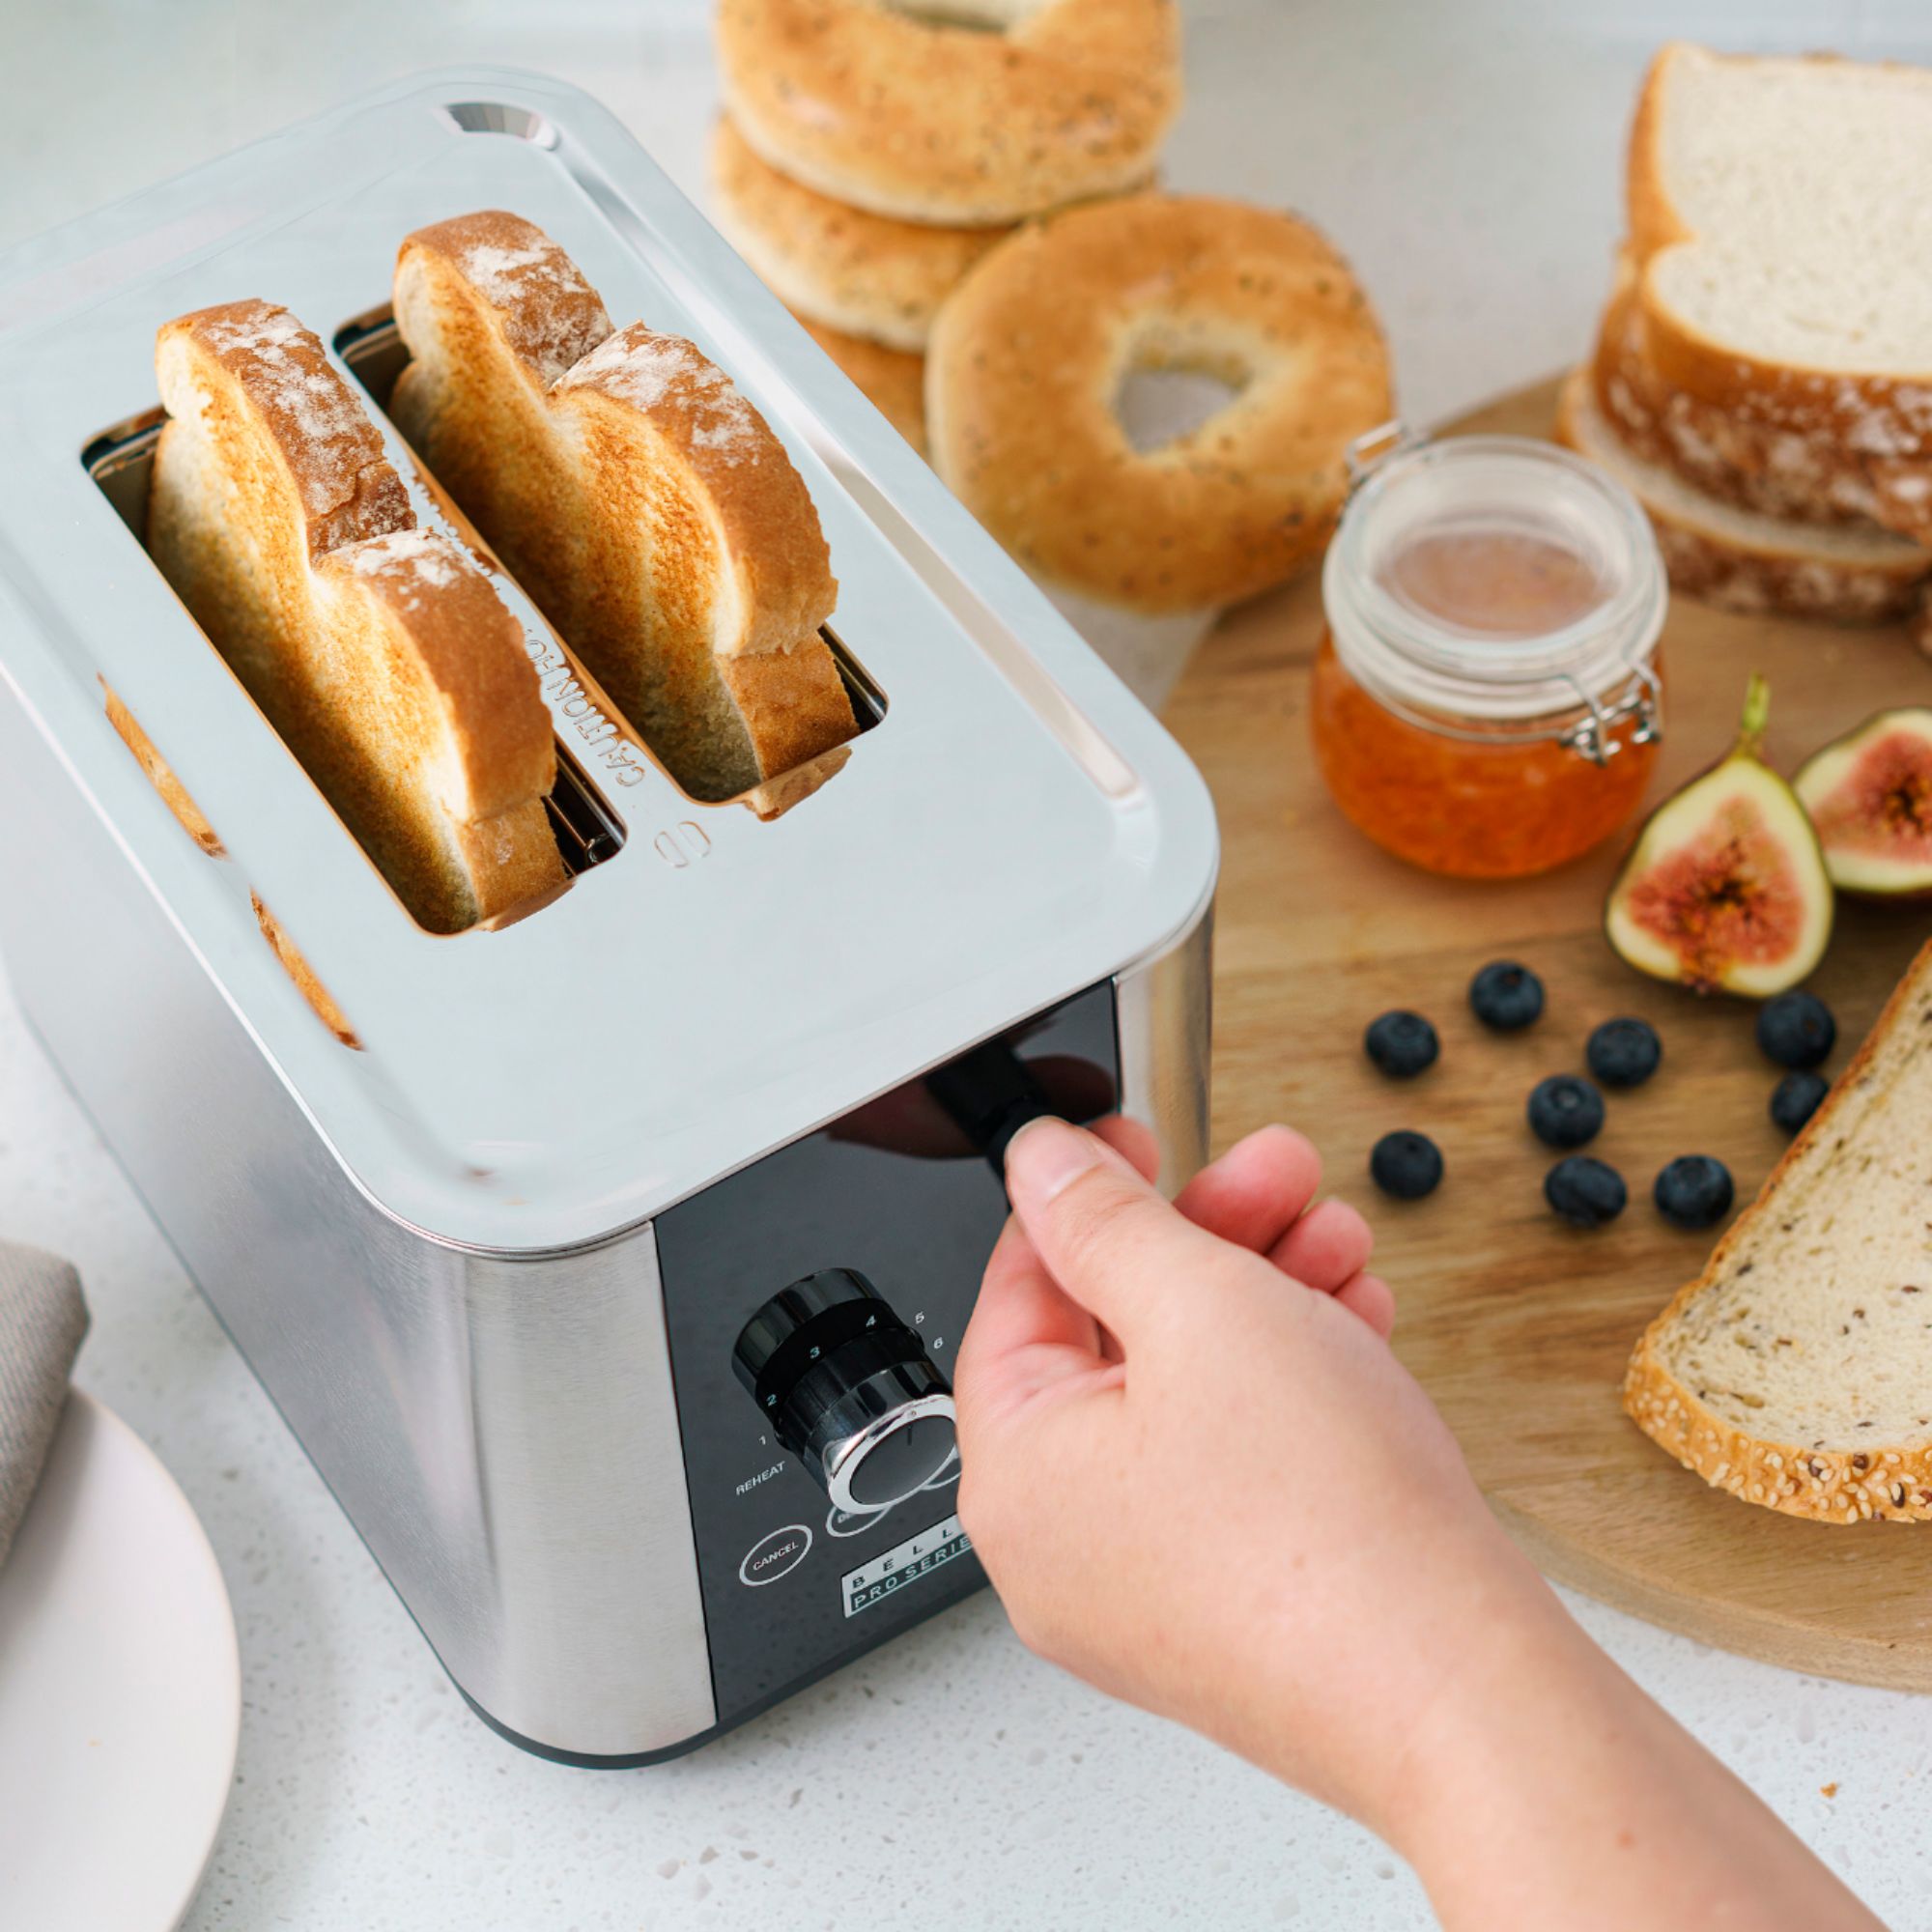 BELLA 4 Slice Toaster with Auto Shut Off - Extra Wide Slots & Removable  Crumb Tray and Cancel, Defrost & Reheat Function - Toast Bread & Bagel,  Black